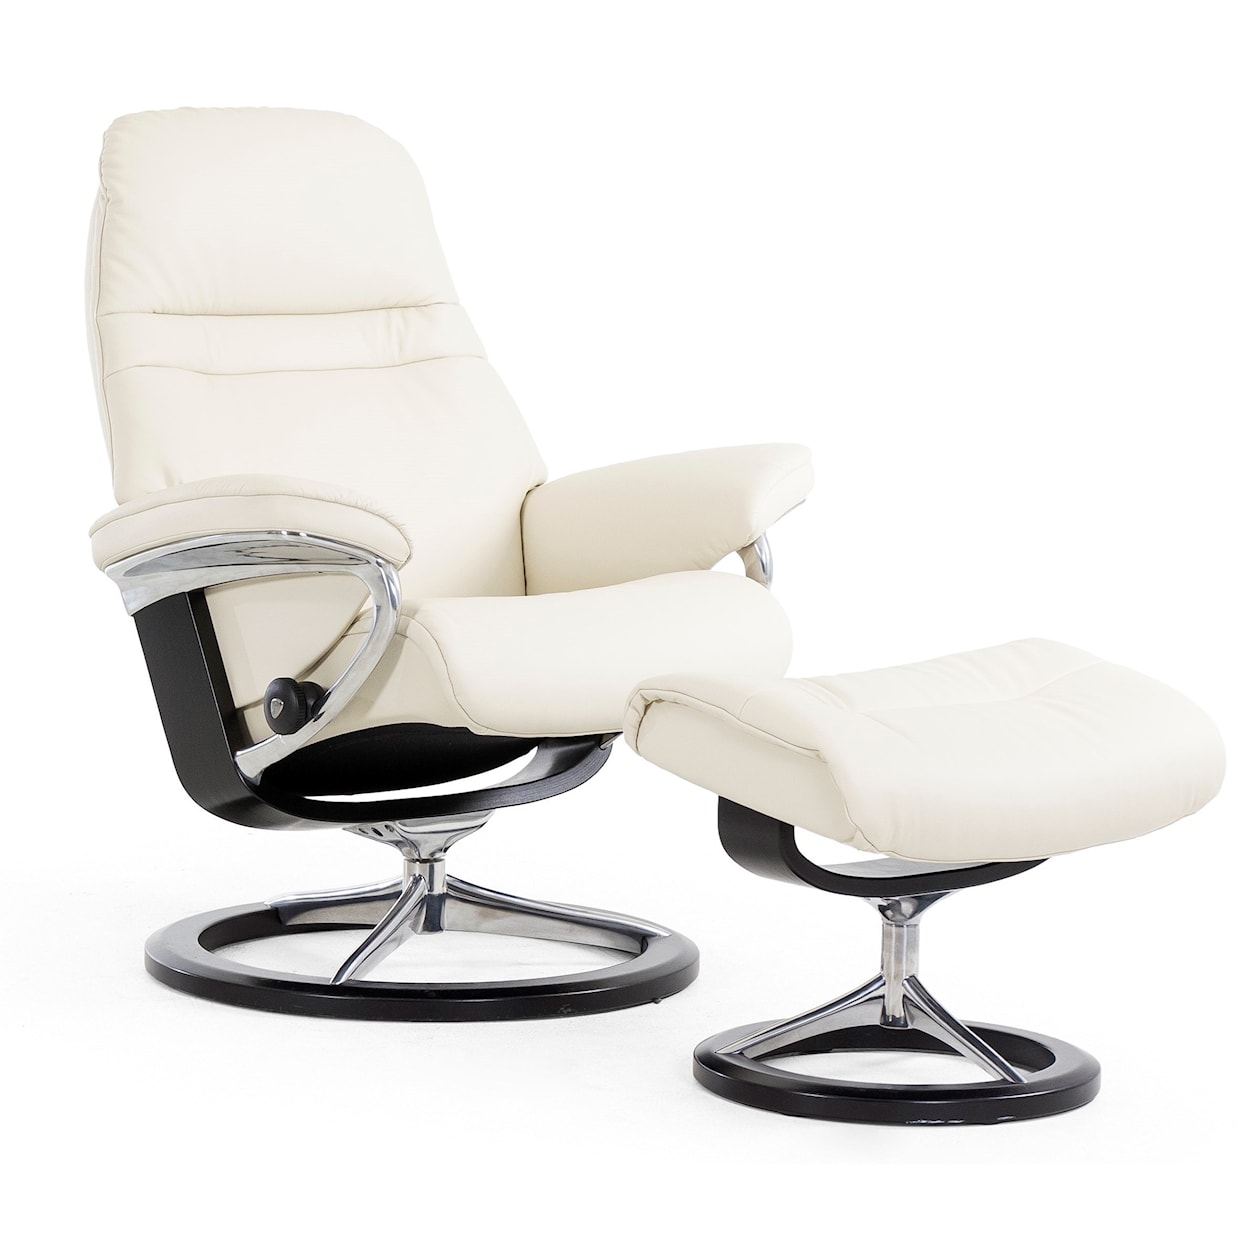 Stressless by Ekornes Sunrise Small Reclining Chair and Ottoman